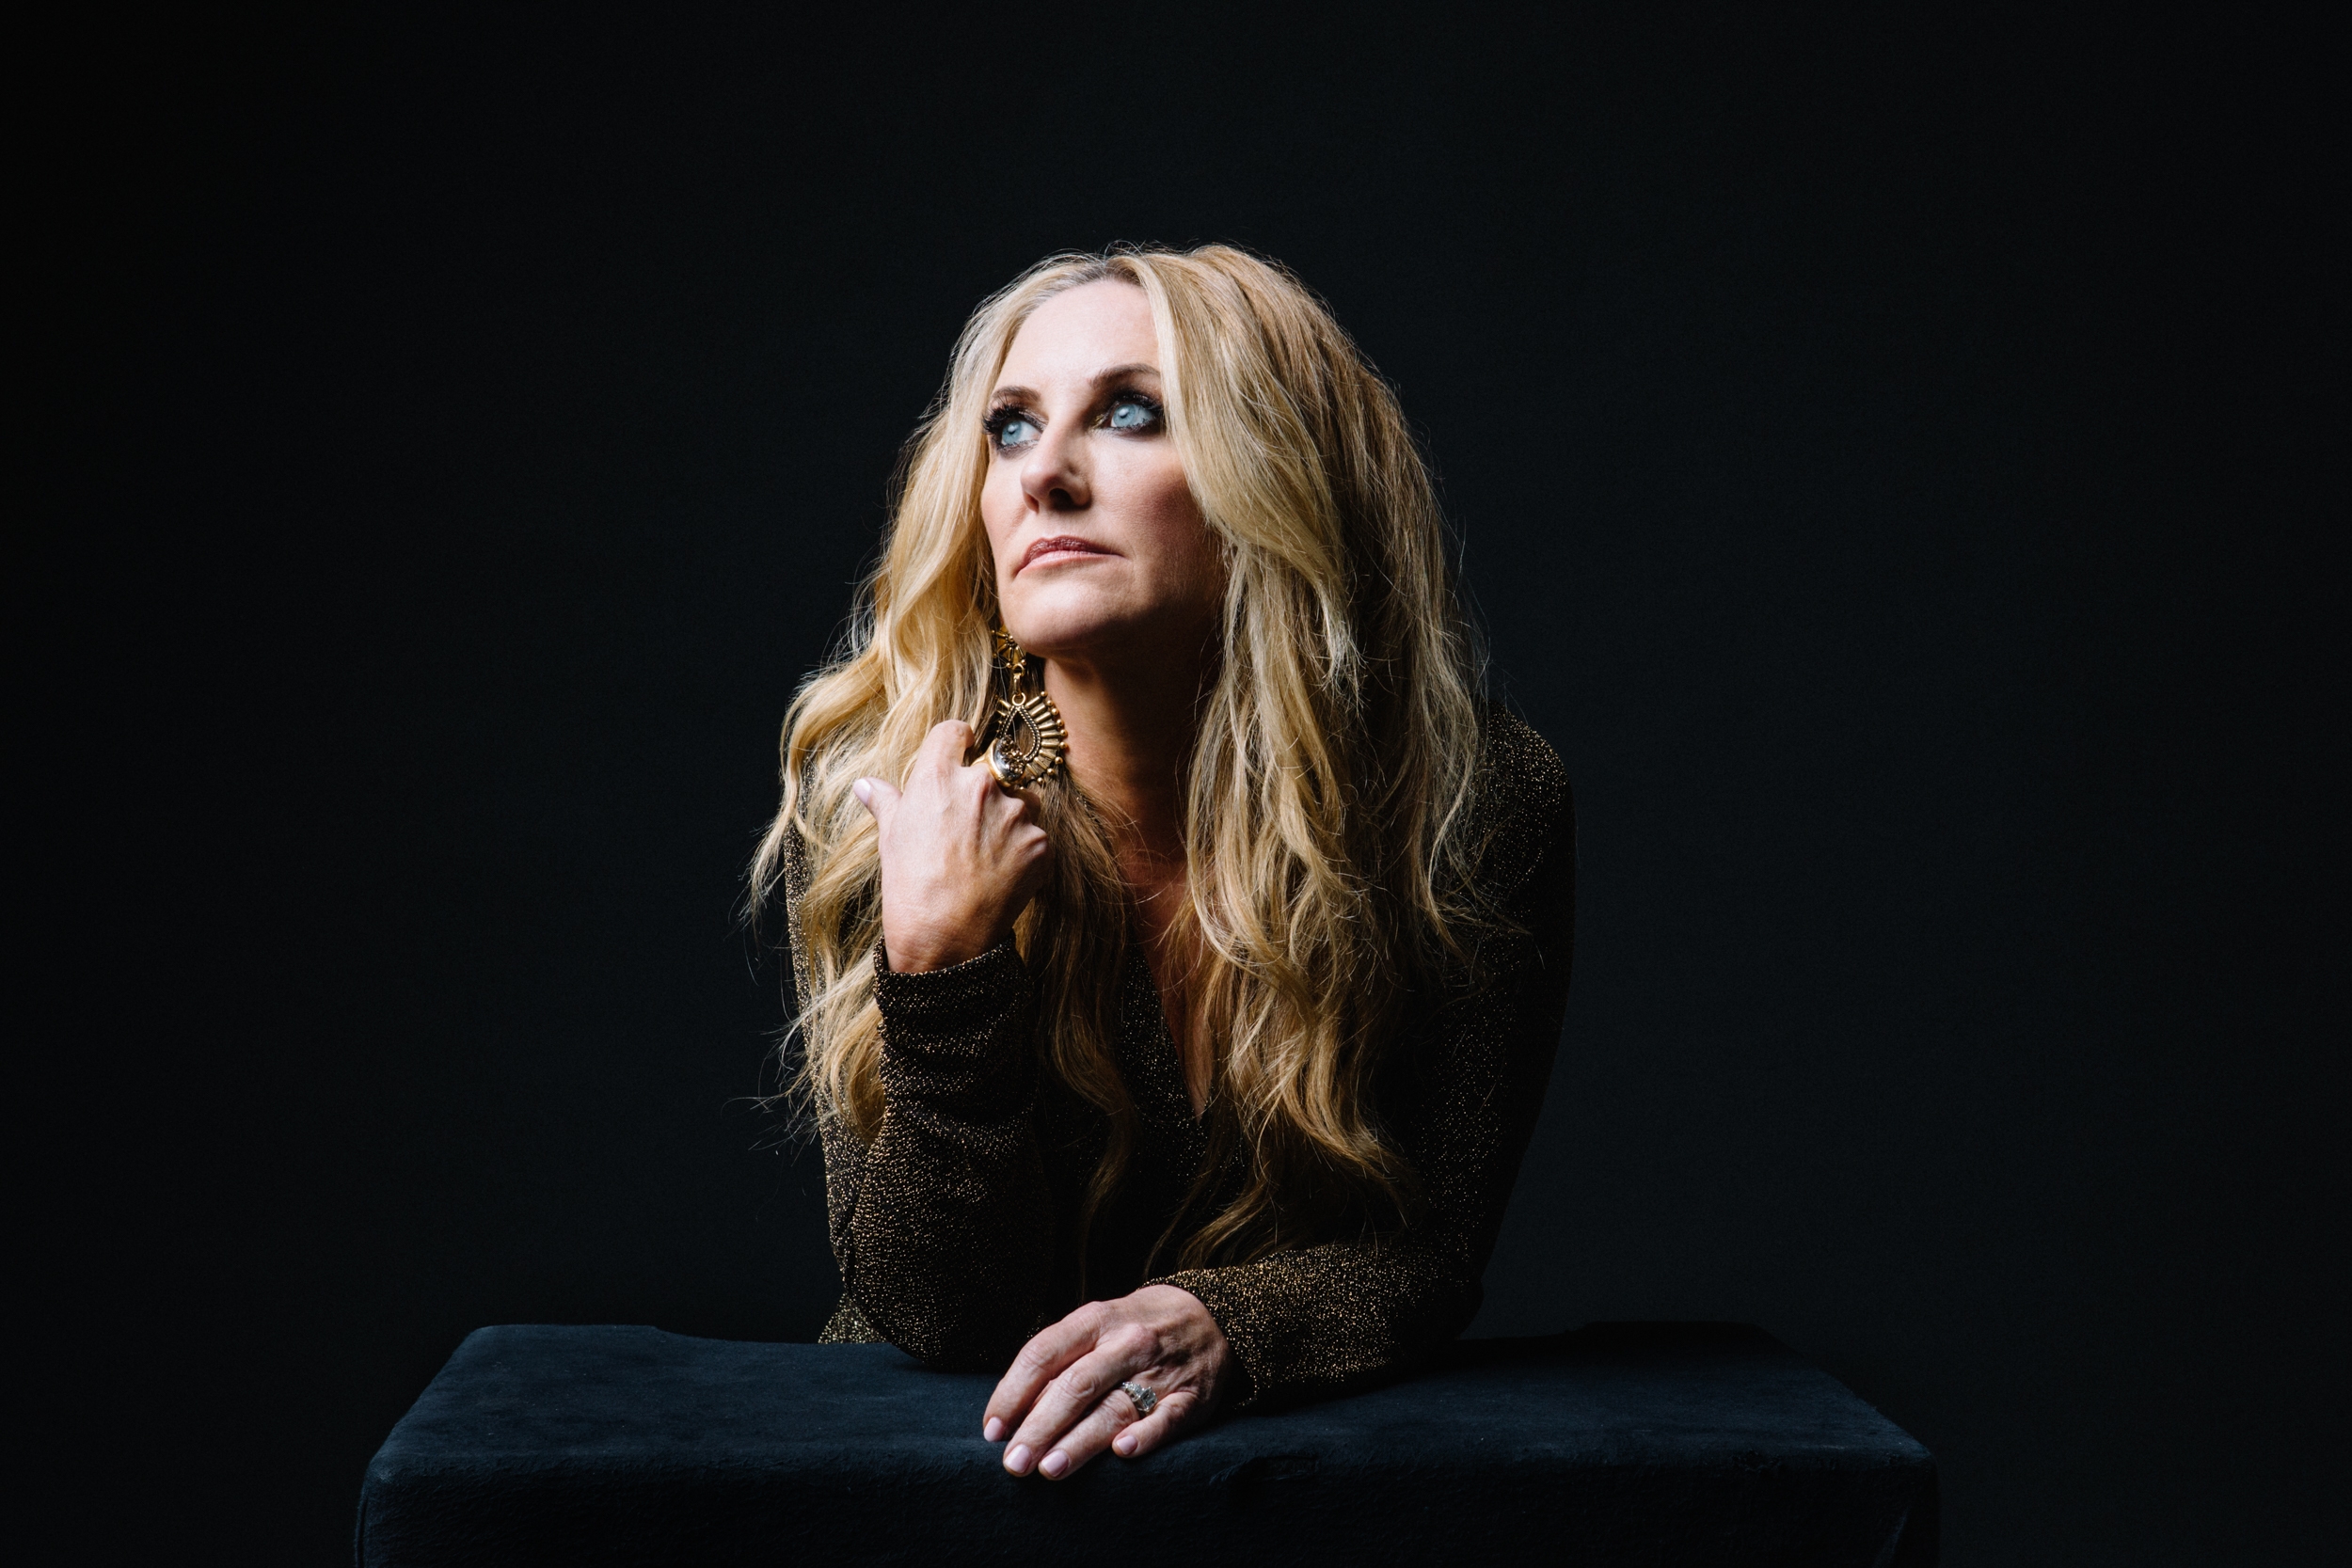 Back to the Beginning: Multi-platinum country star Lee Ann Womack brings ‘a little bit of East Texas’ to GR